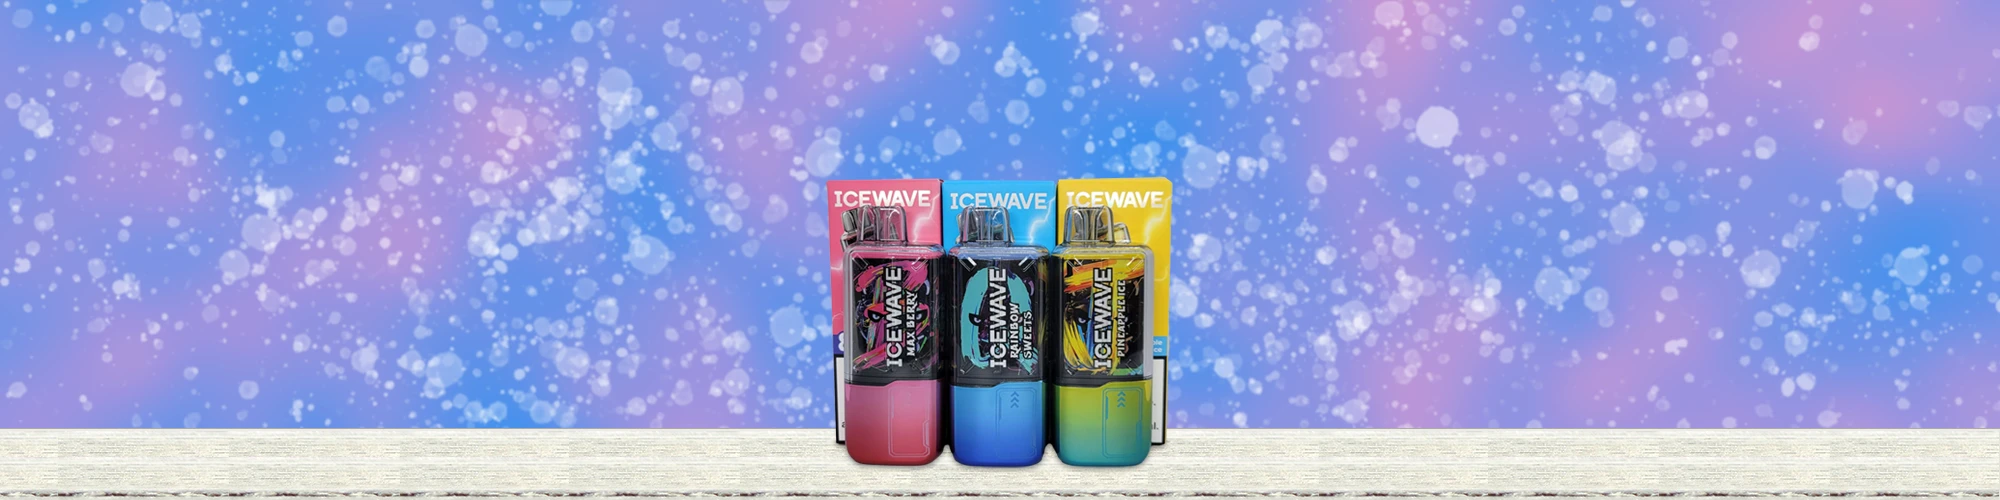 ICEWAVE X8500 Disposables Review Main Banner